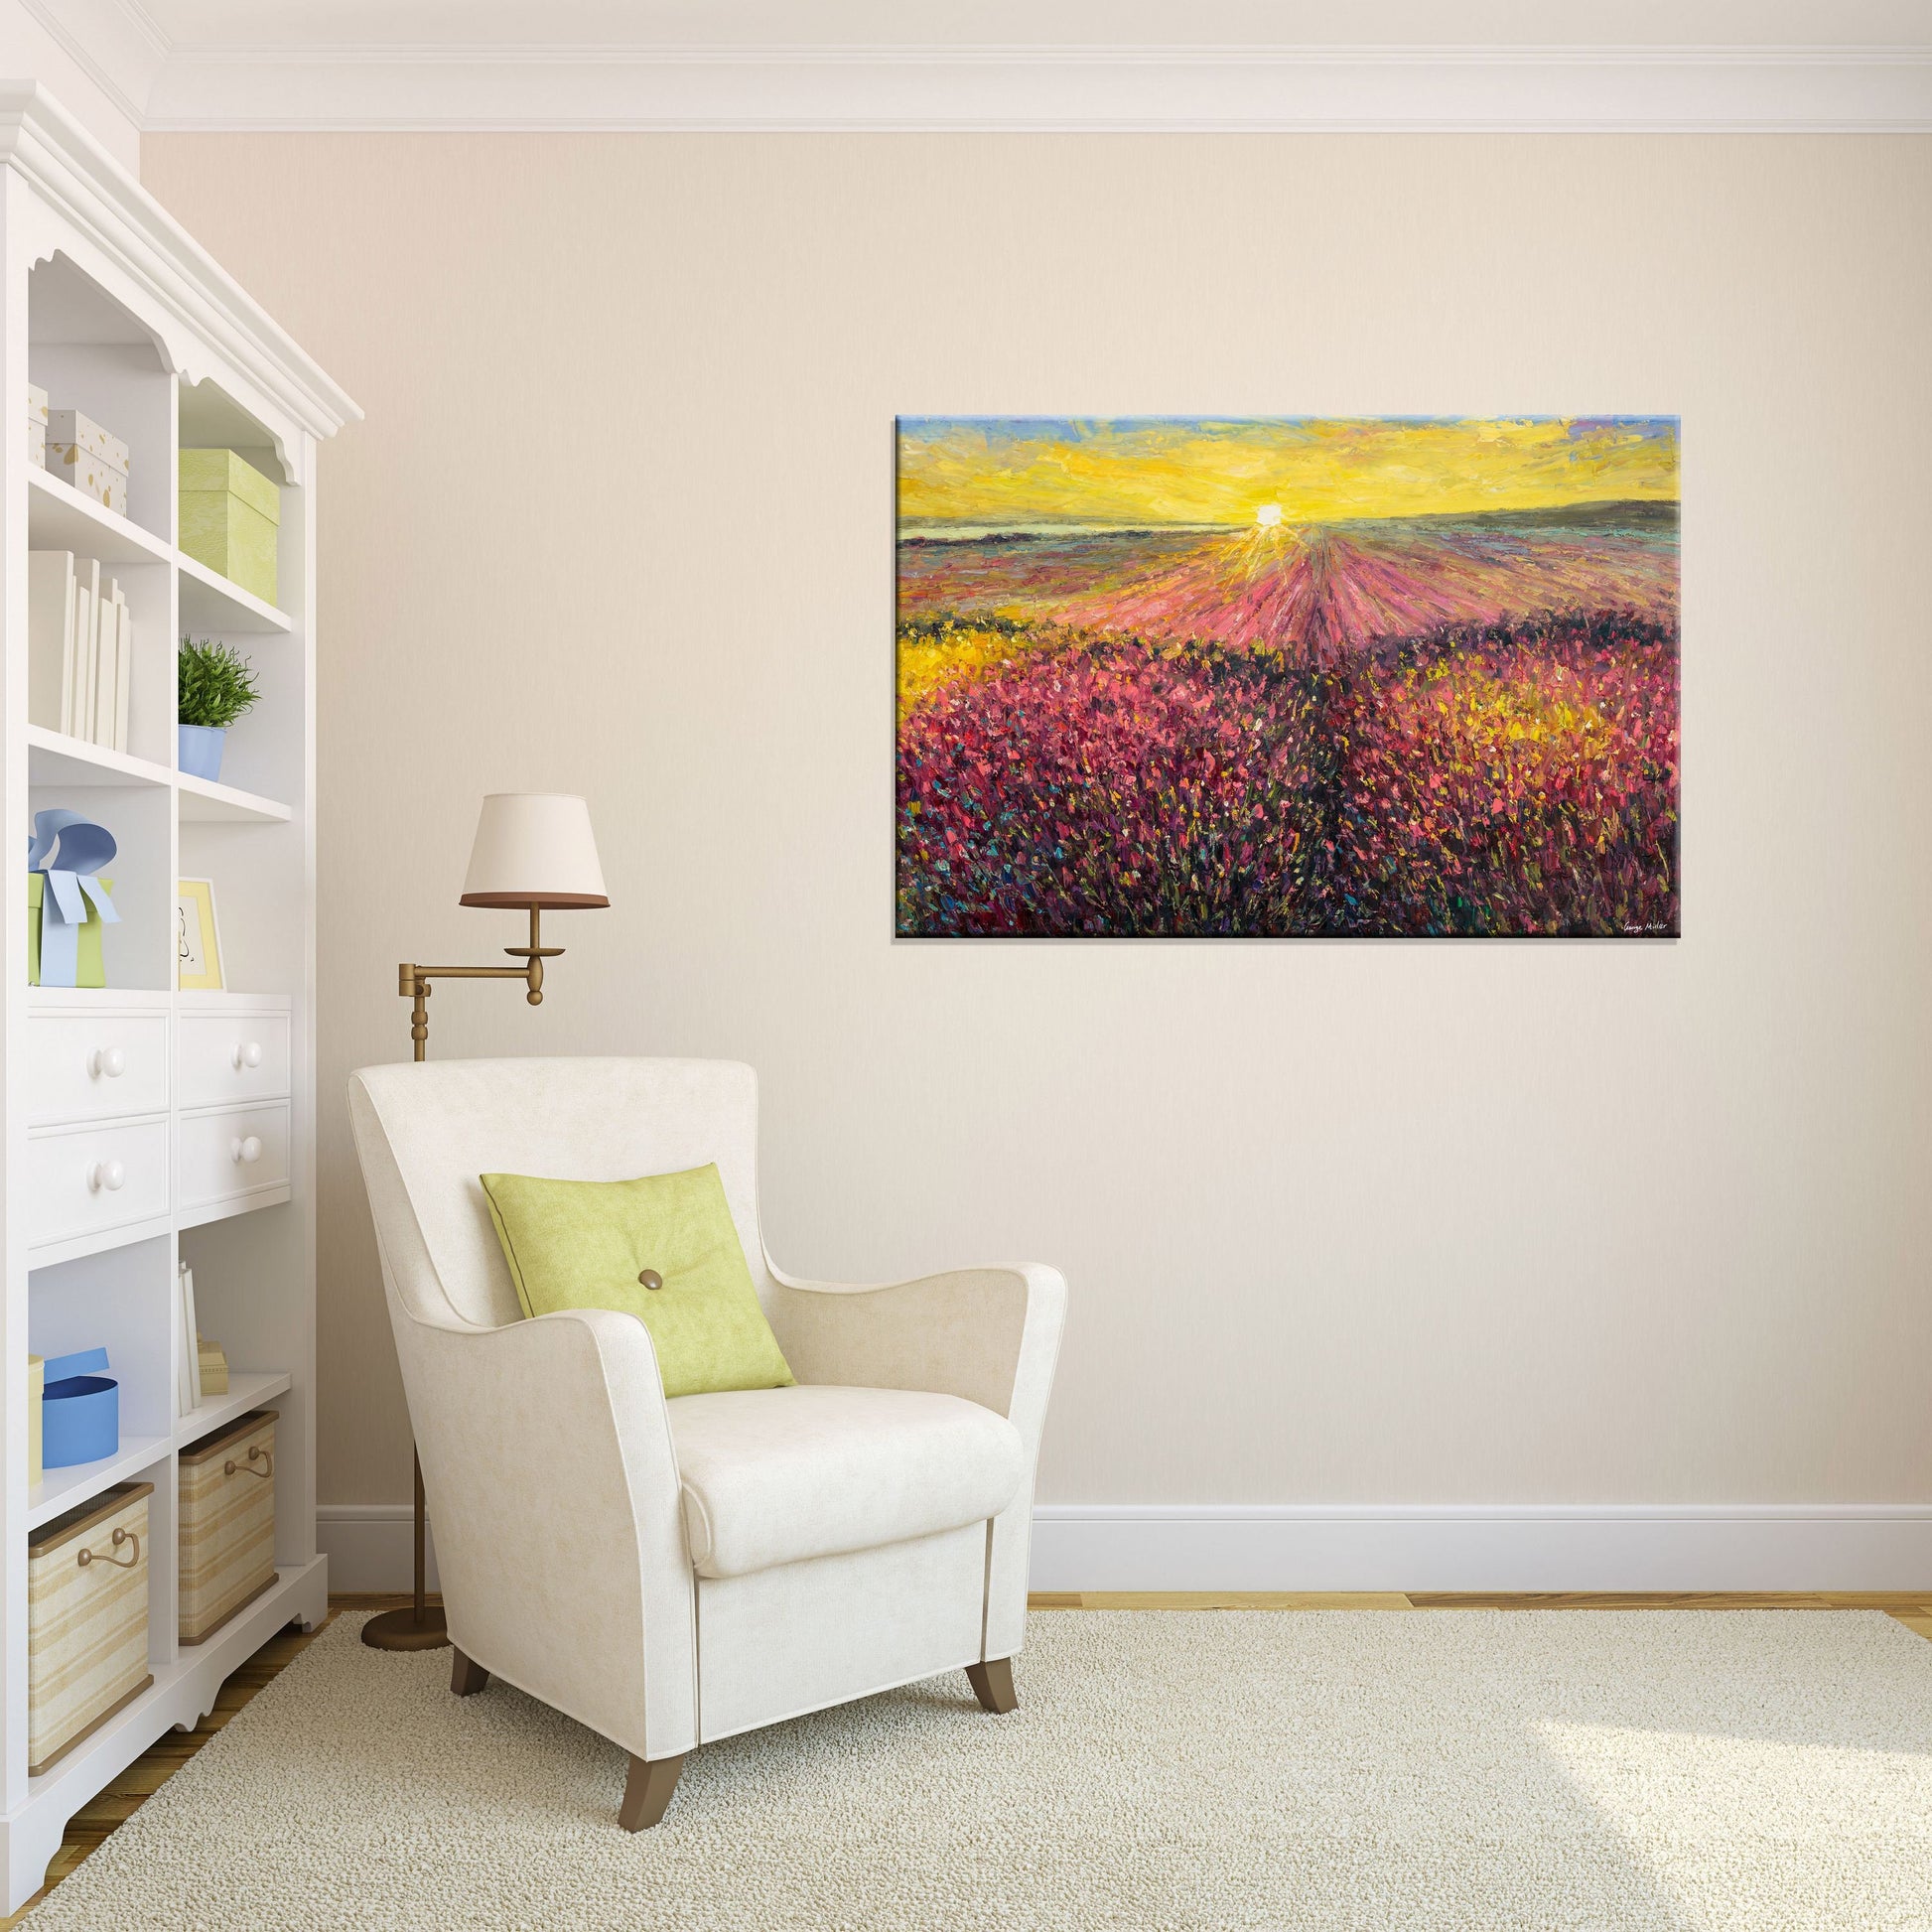 Experience the Beauty of French Provence with this Lavender Fields Oil Painting, Ready to Hang on Your Wall